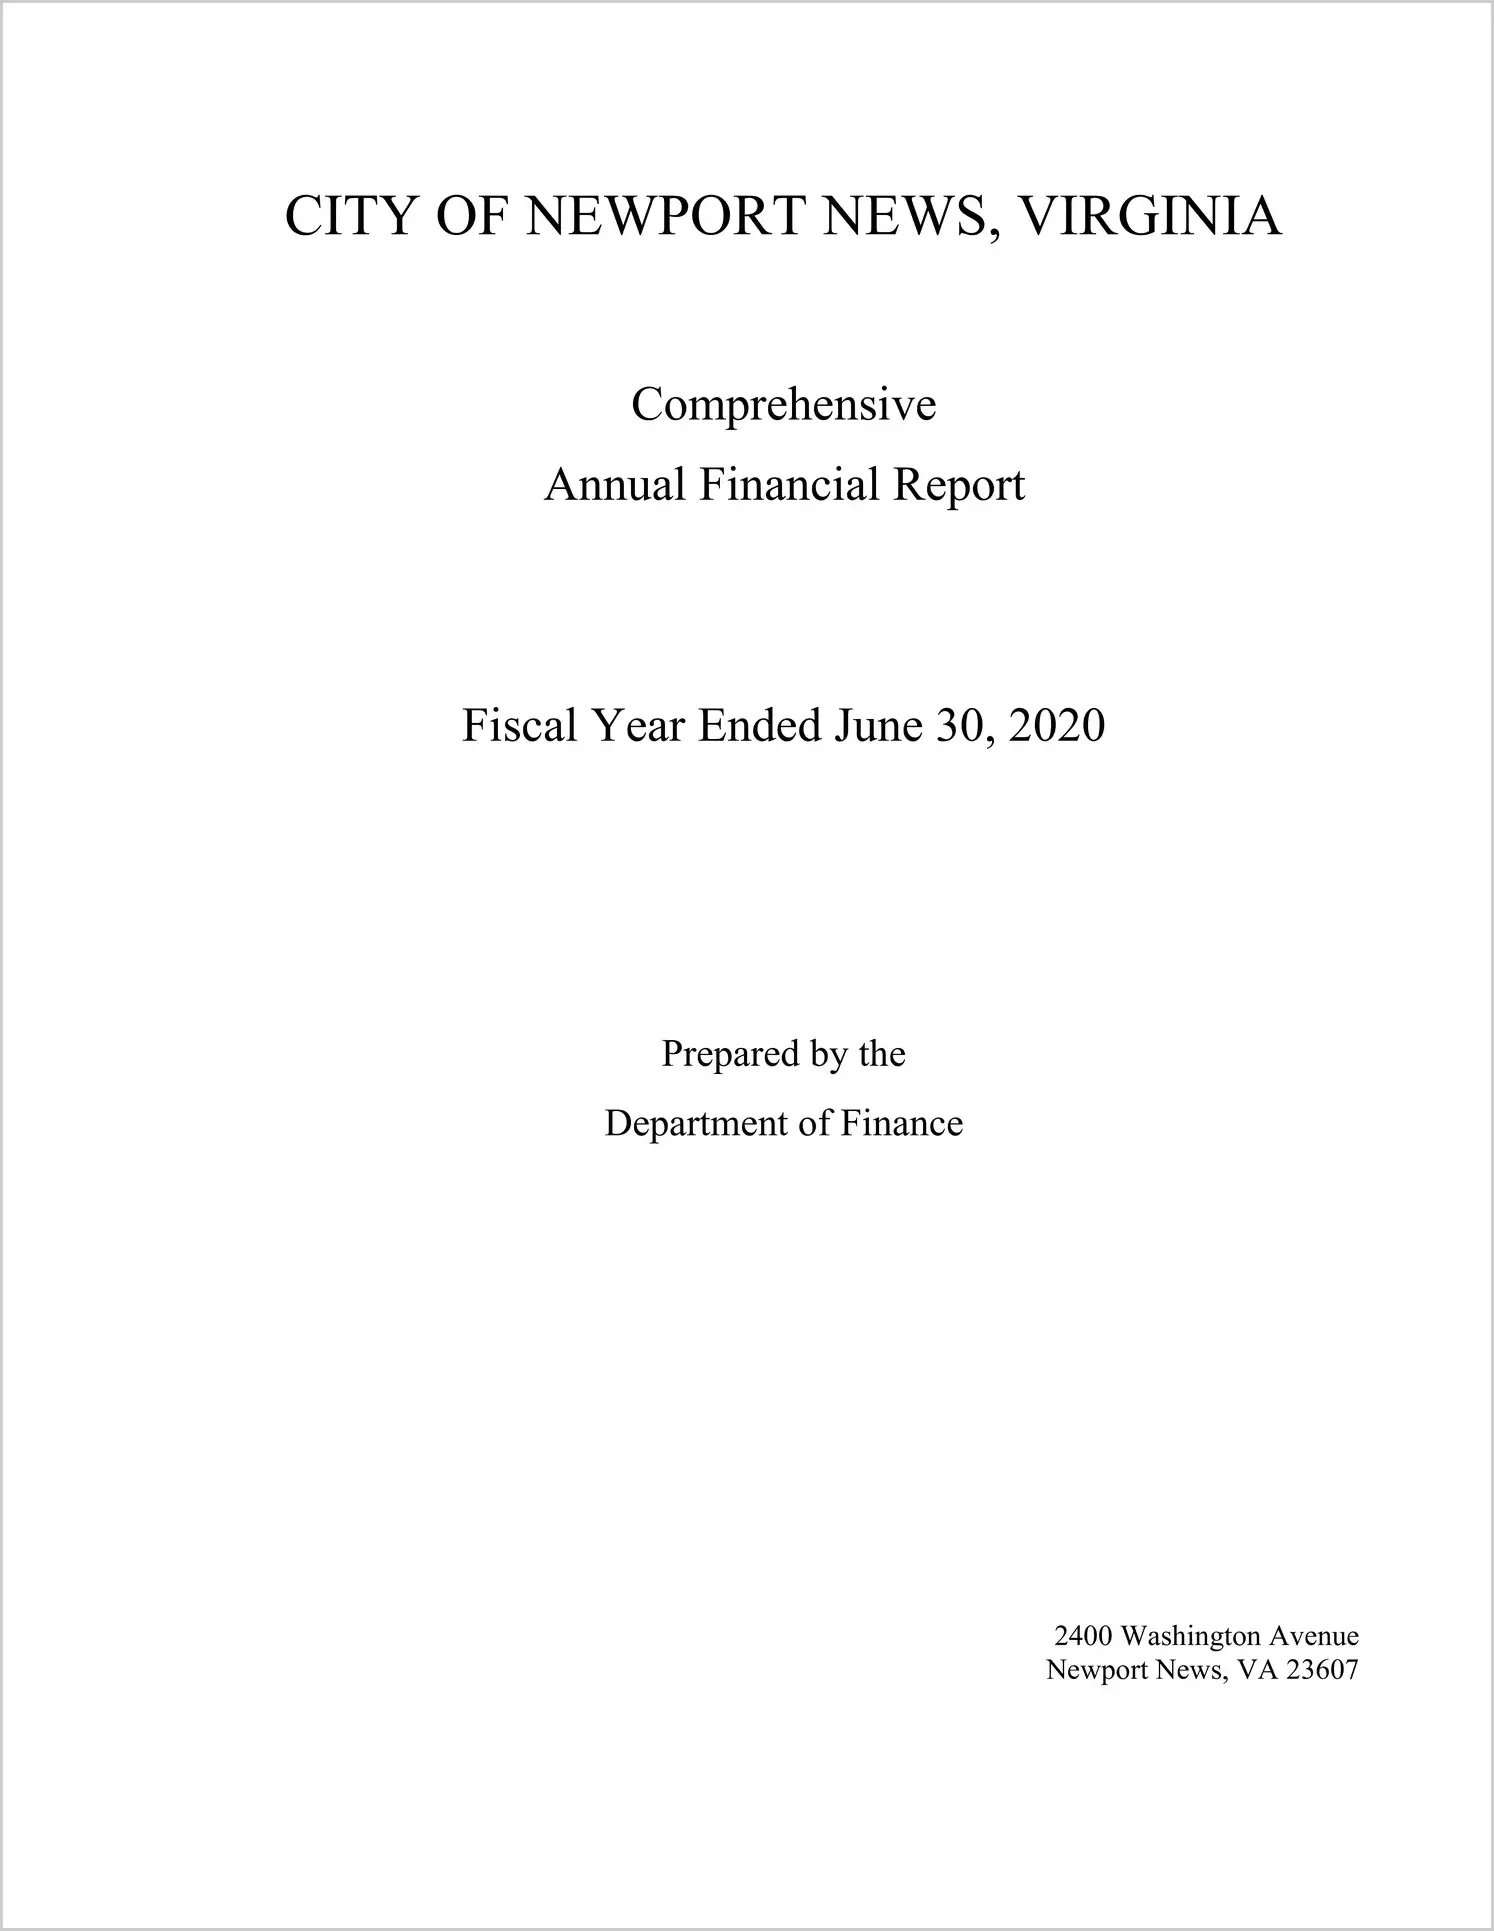 2020 Annual Financial Report for City of Newport News